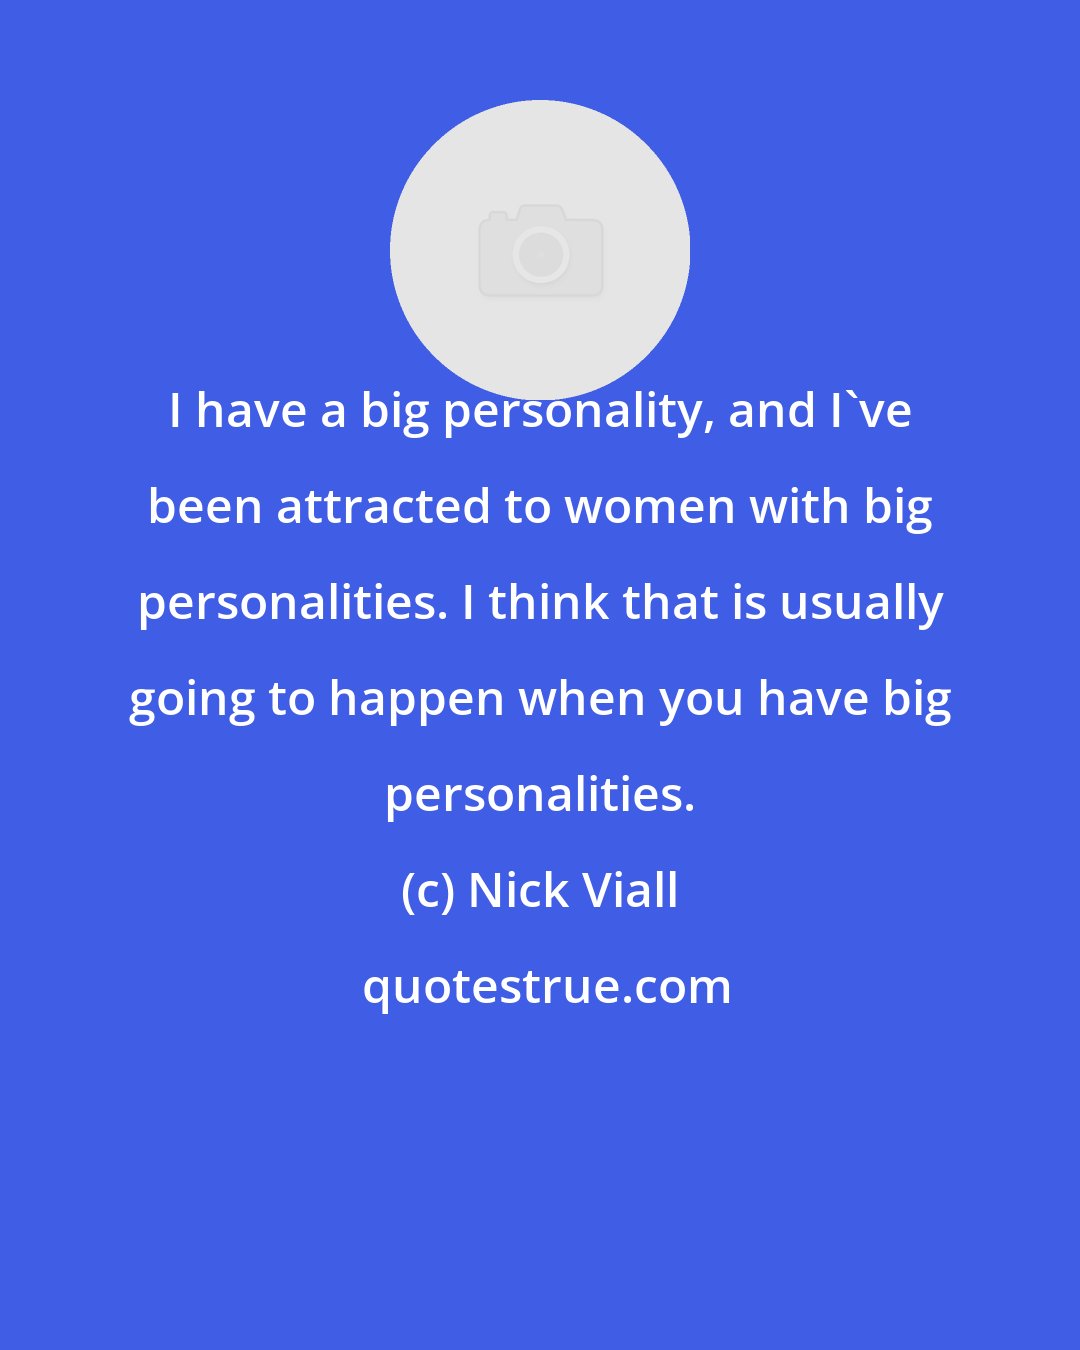 Nick Viall: I have a big personality, and I've been attracted to women with big personalities. I think that is usually going to happen when you have big personalities.